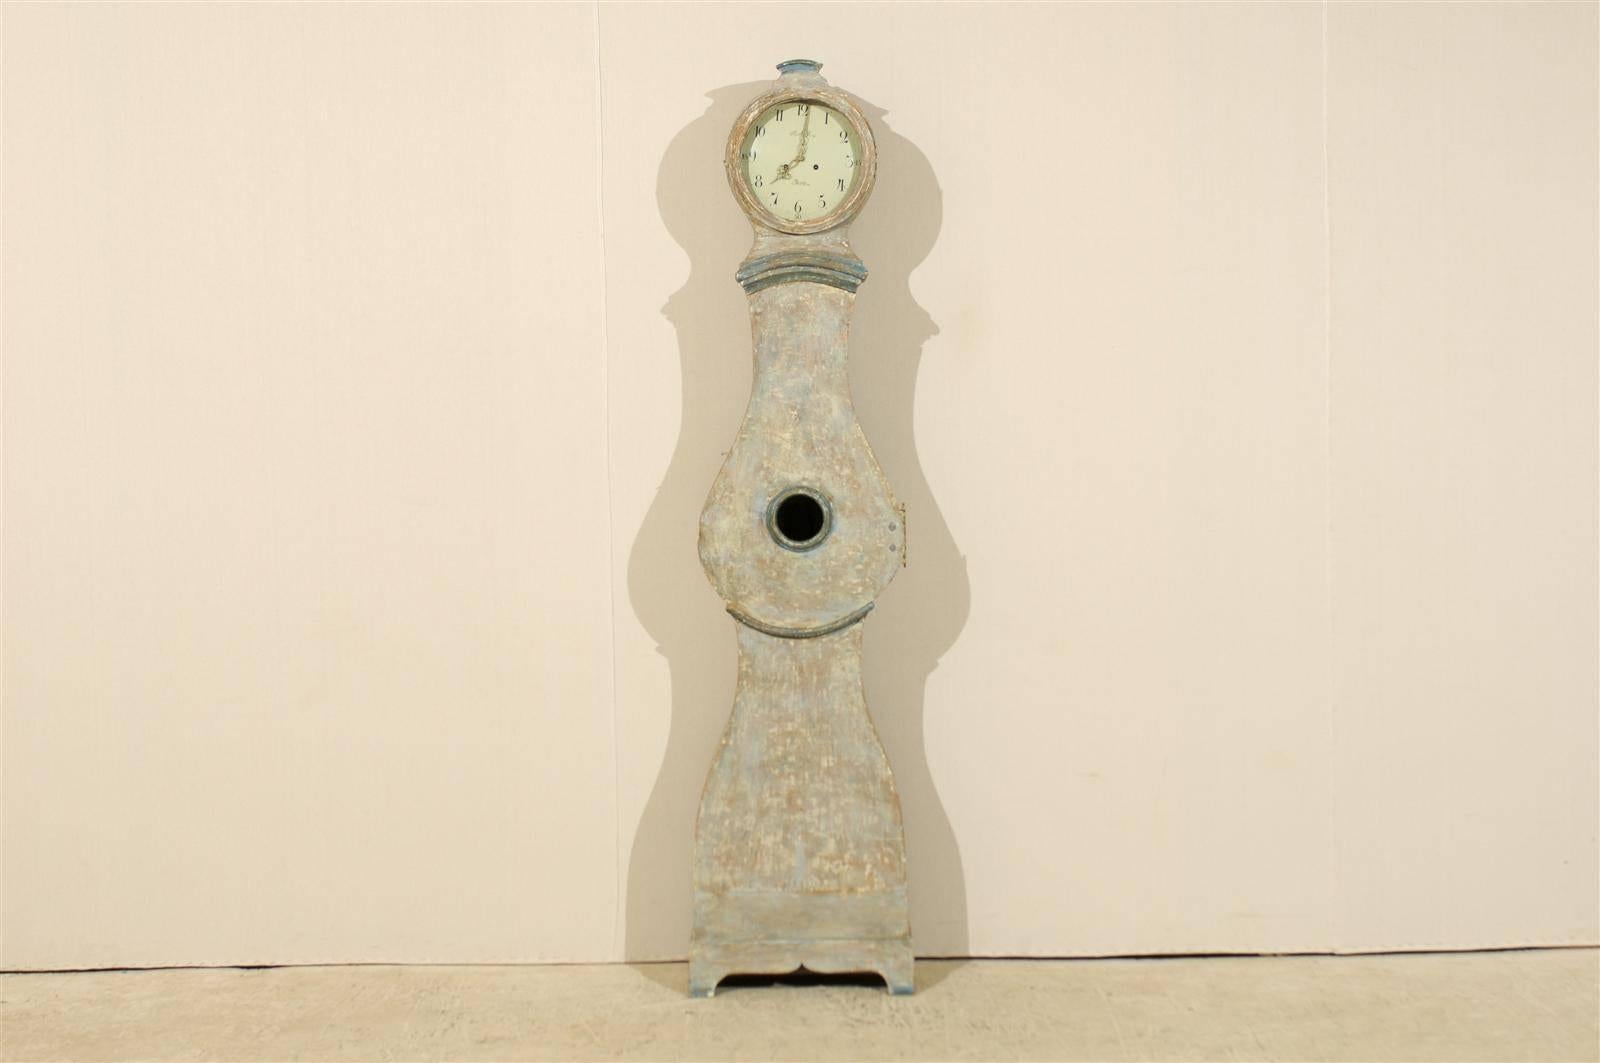 An early 19th century Swedish mora clock. This Swedish painted wood mora clock features a round head topped with a small carving. This clock retains it's original metal face, hands and movement.  The face is signed A A S and Mora. The molding on the